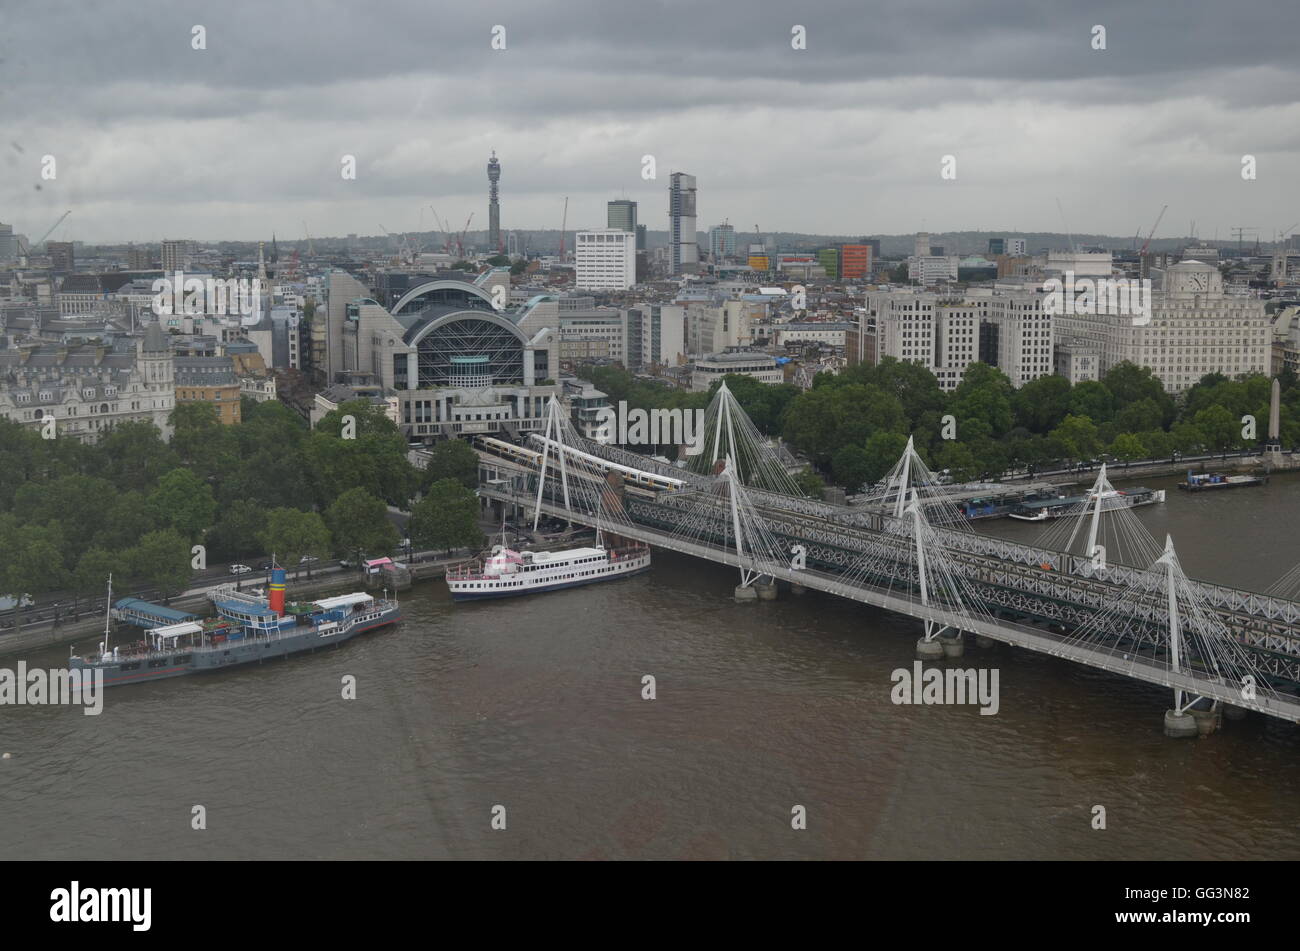 Views of Charing Cross, Westminster and the River Thames from the London Eye. London, United Kingdom. Stock Photo